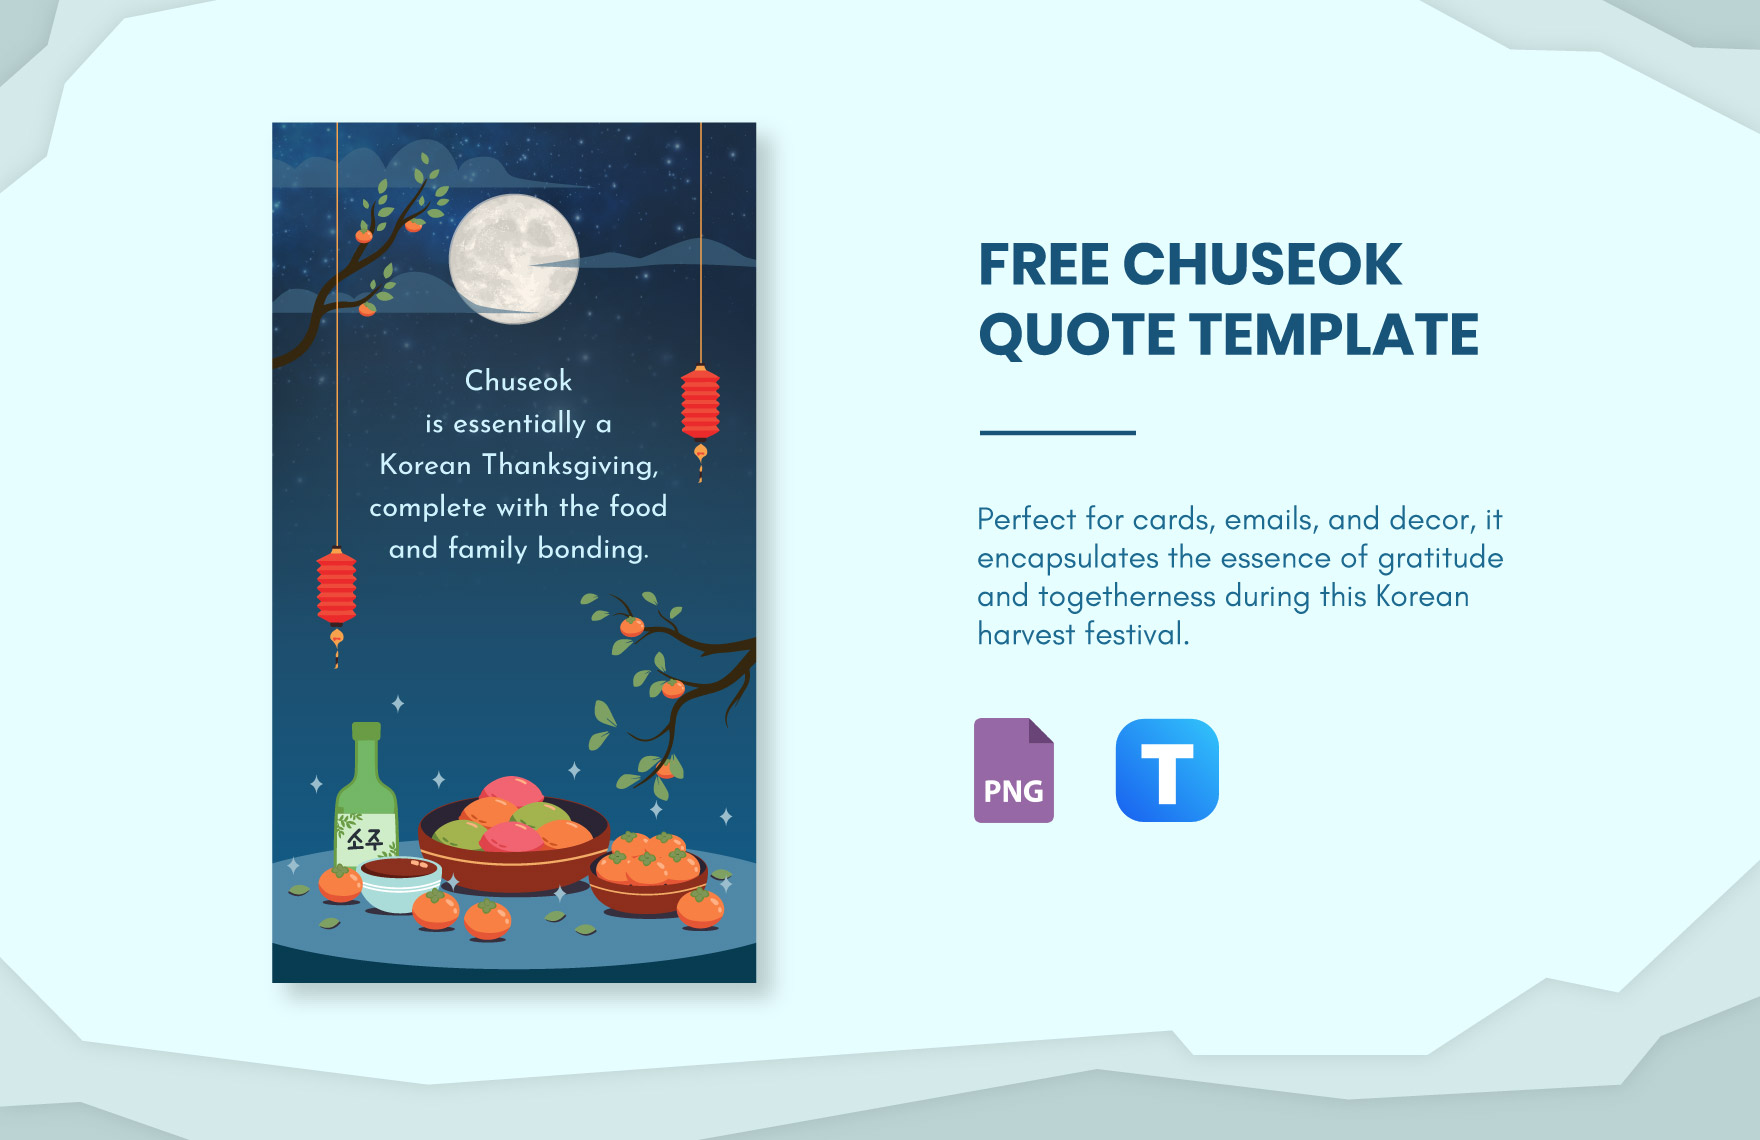 Free Chuseok Quote in PNG